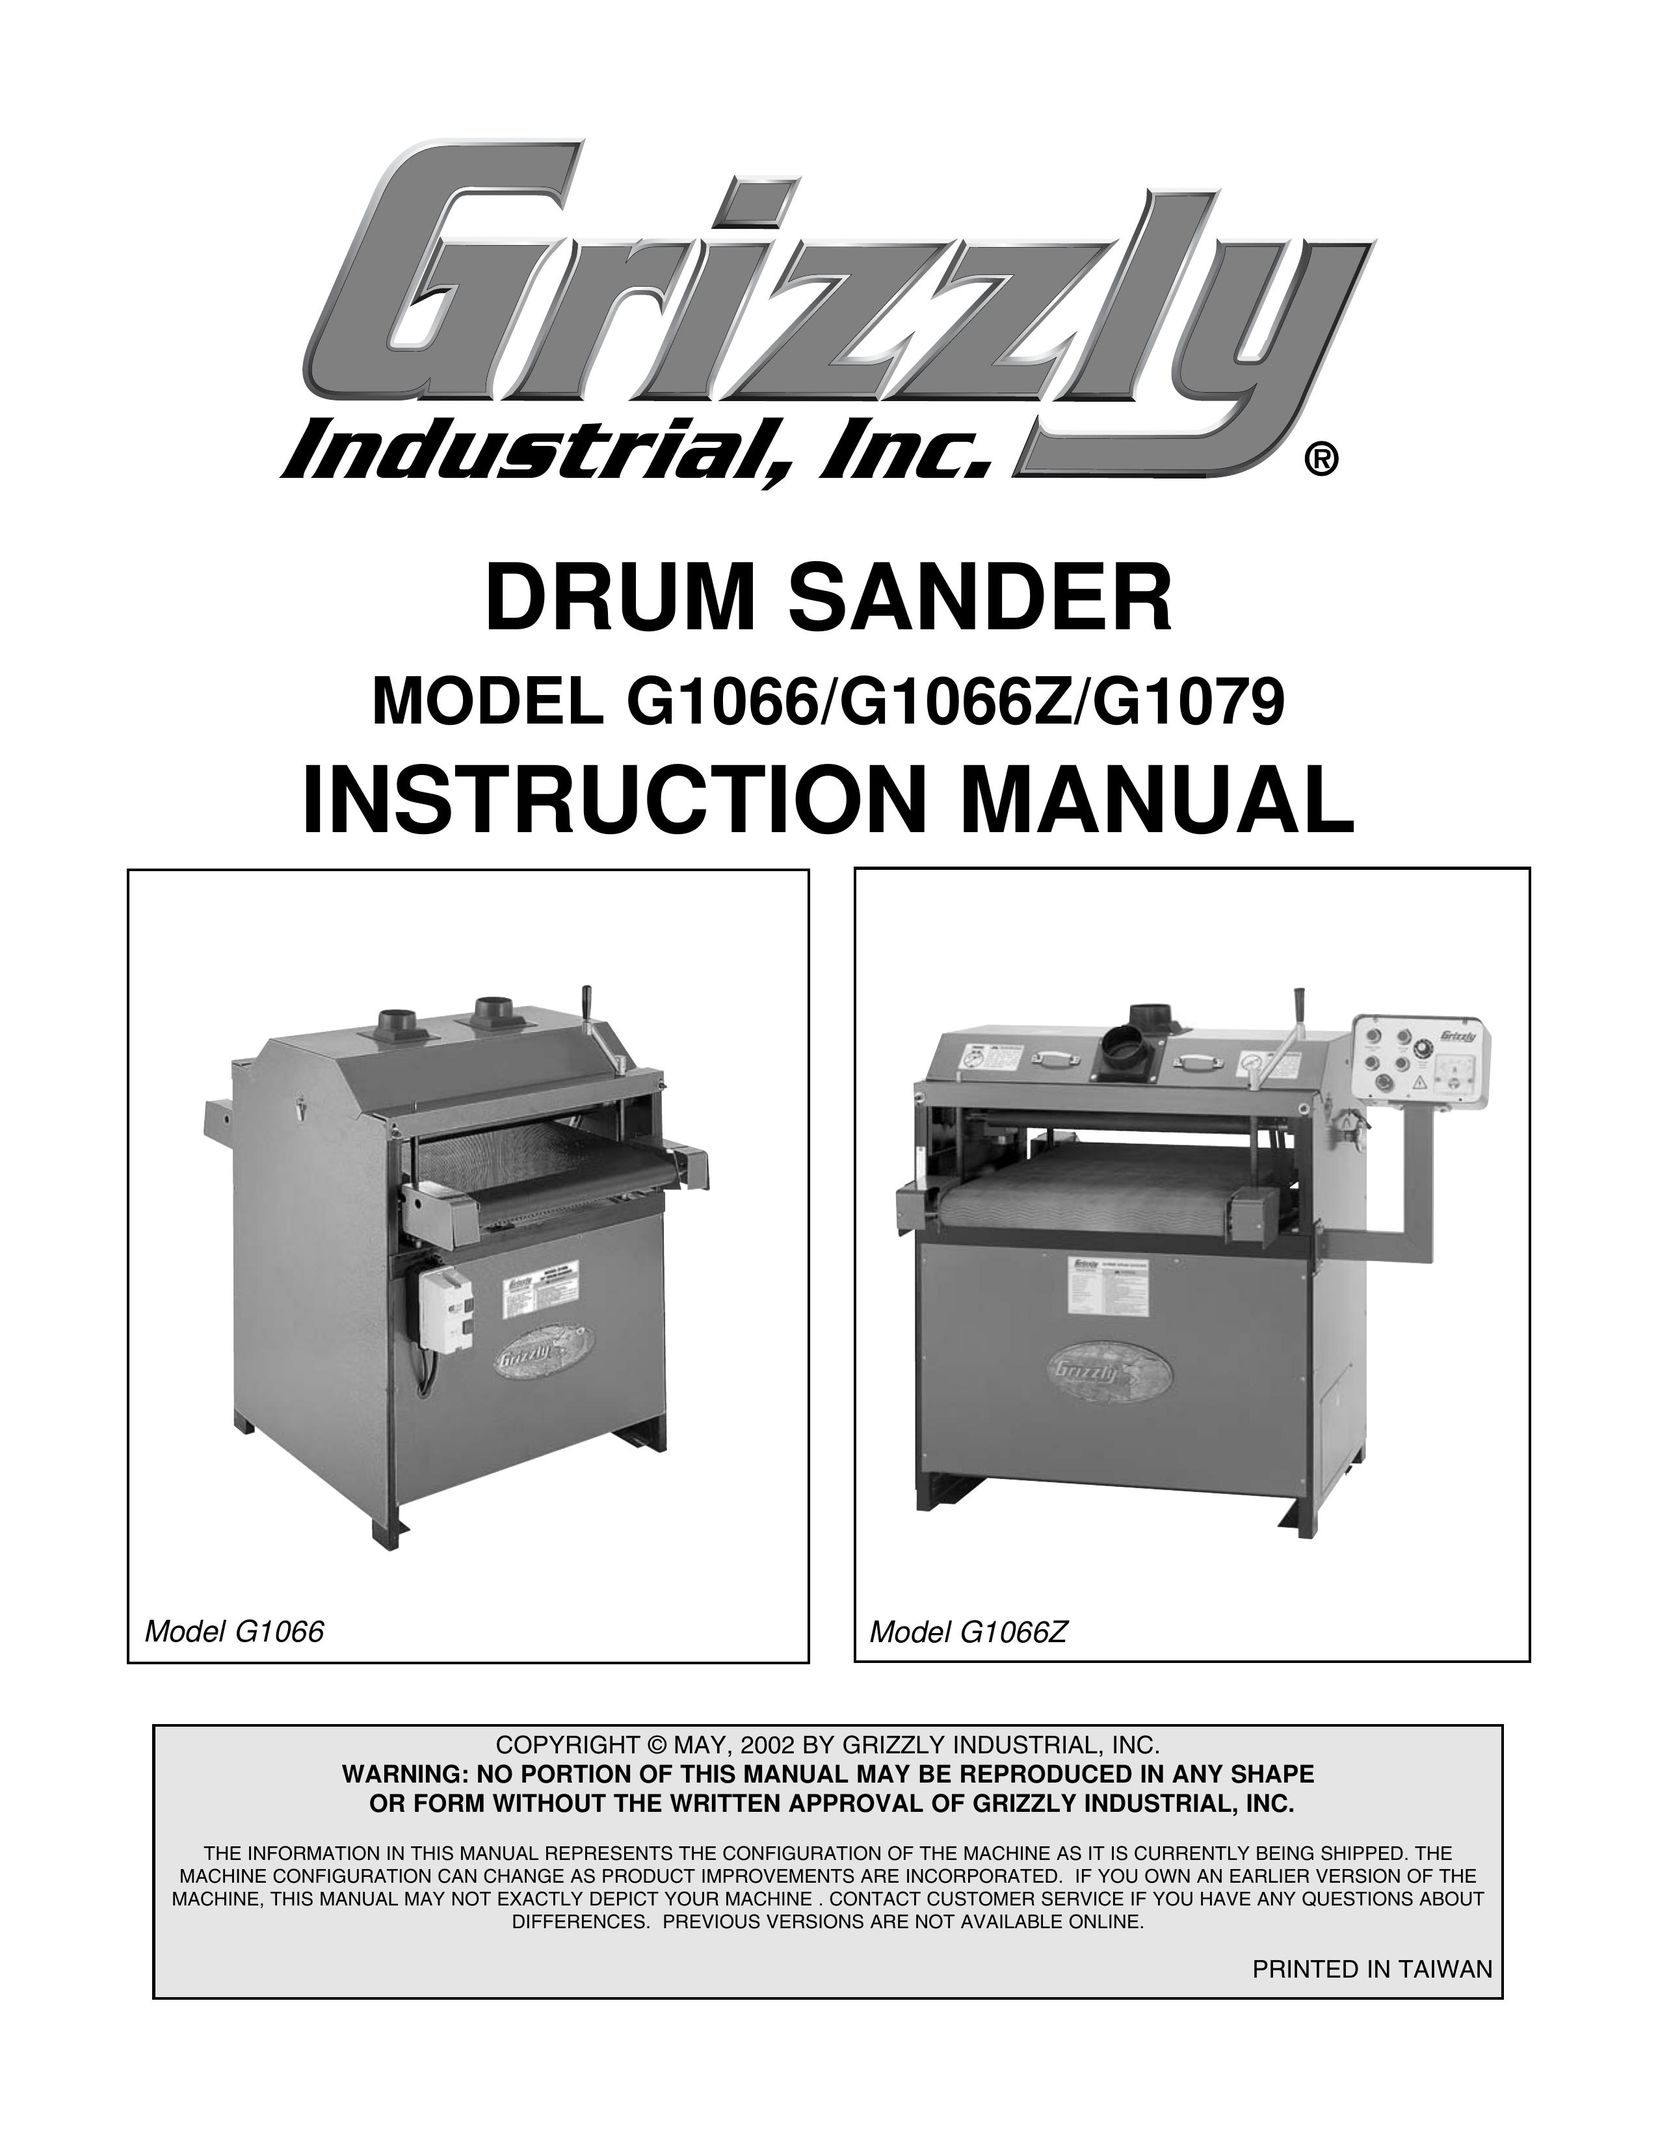 Grizzly G1079 Sander User Manual